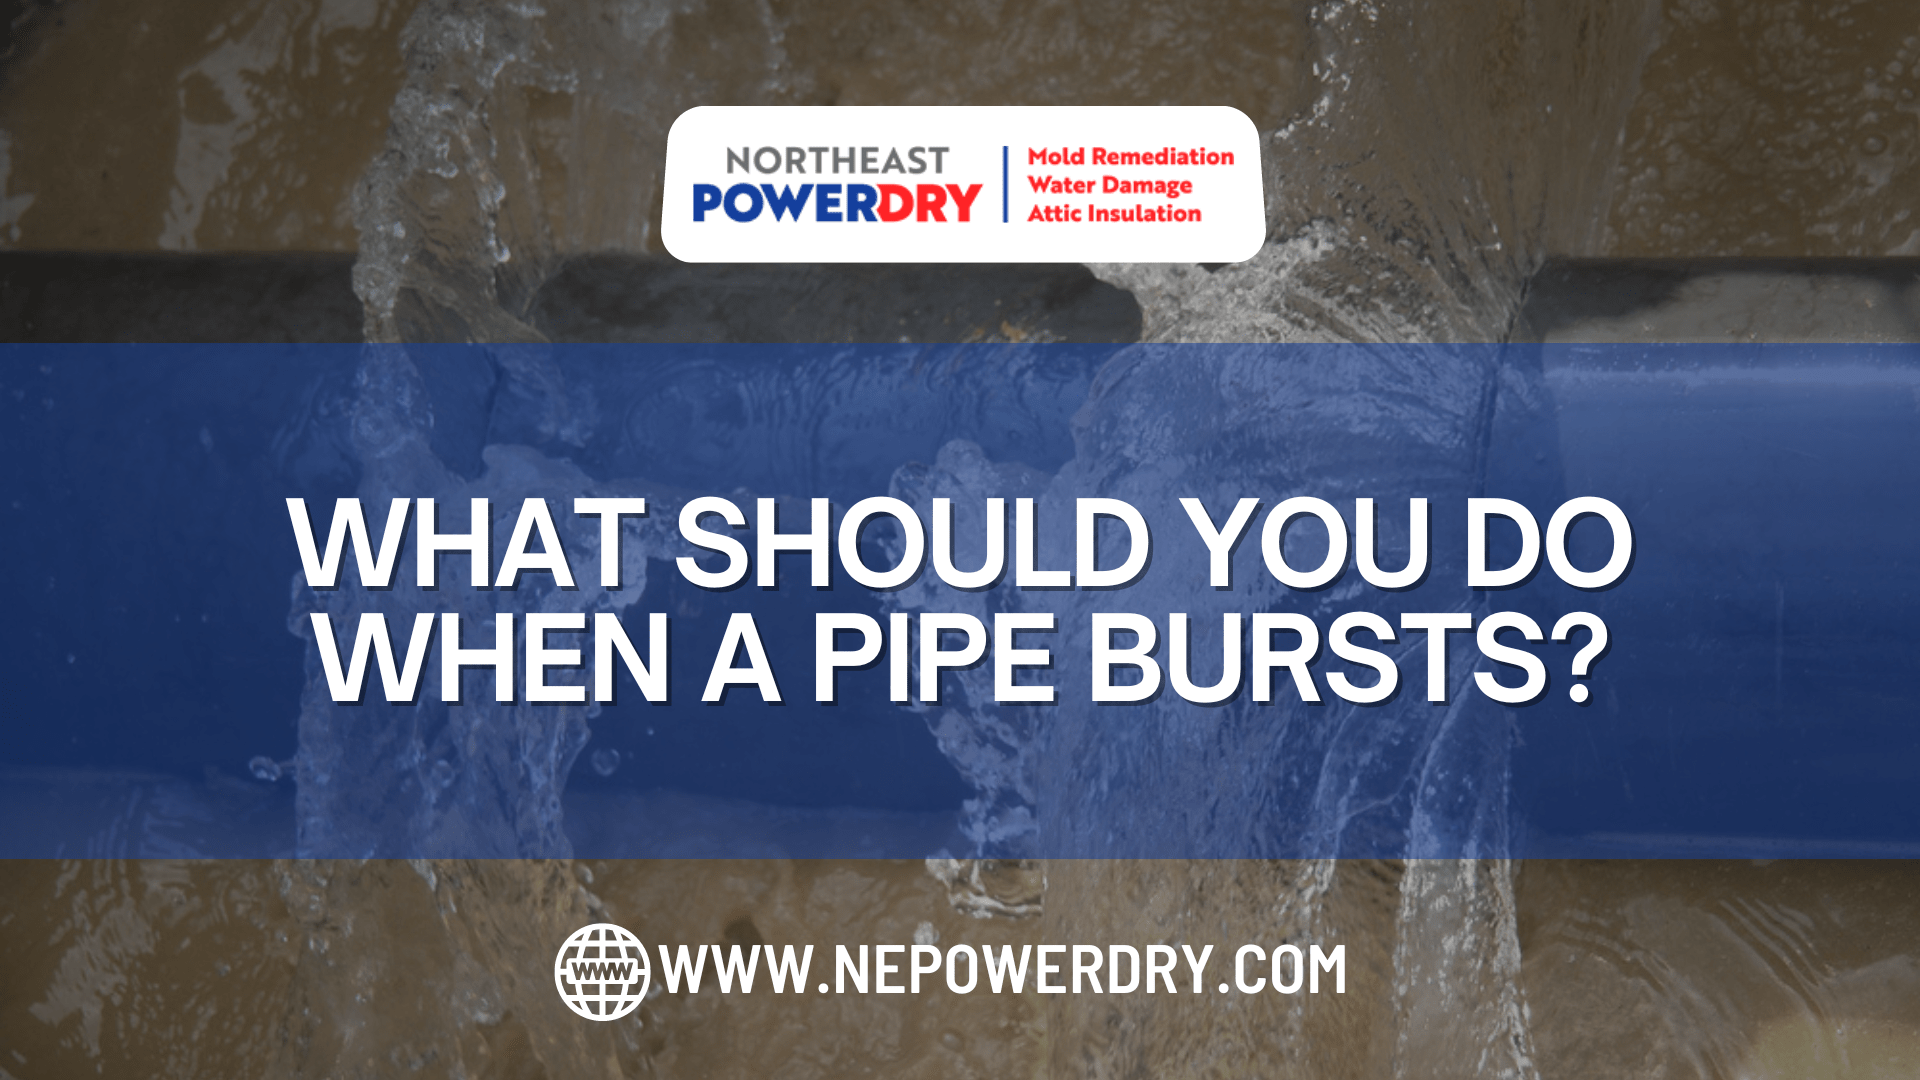 What Should You Do When a Pipe Bursts?